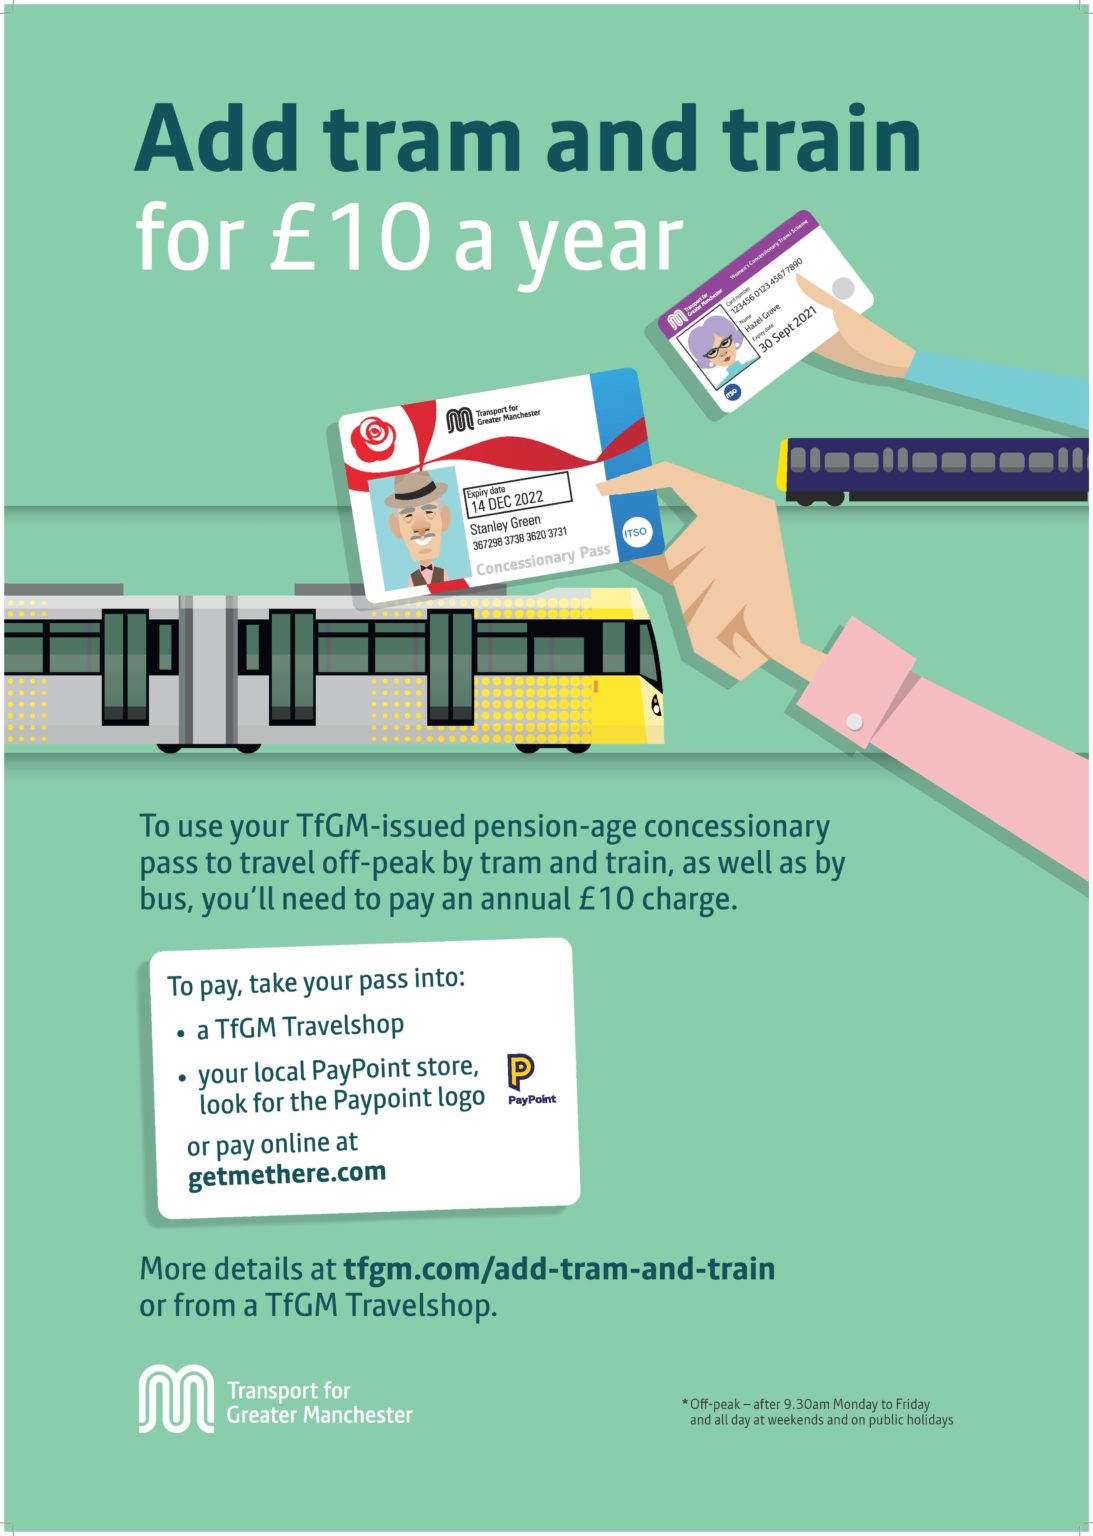 can i use my concessionary travel pass on trains